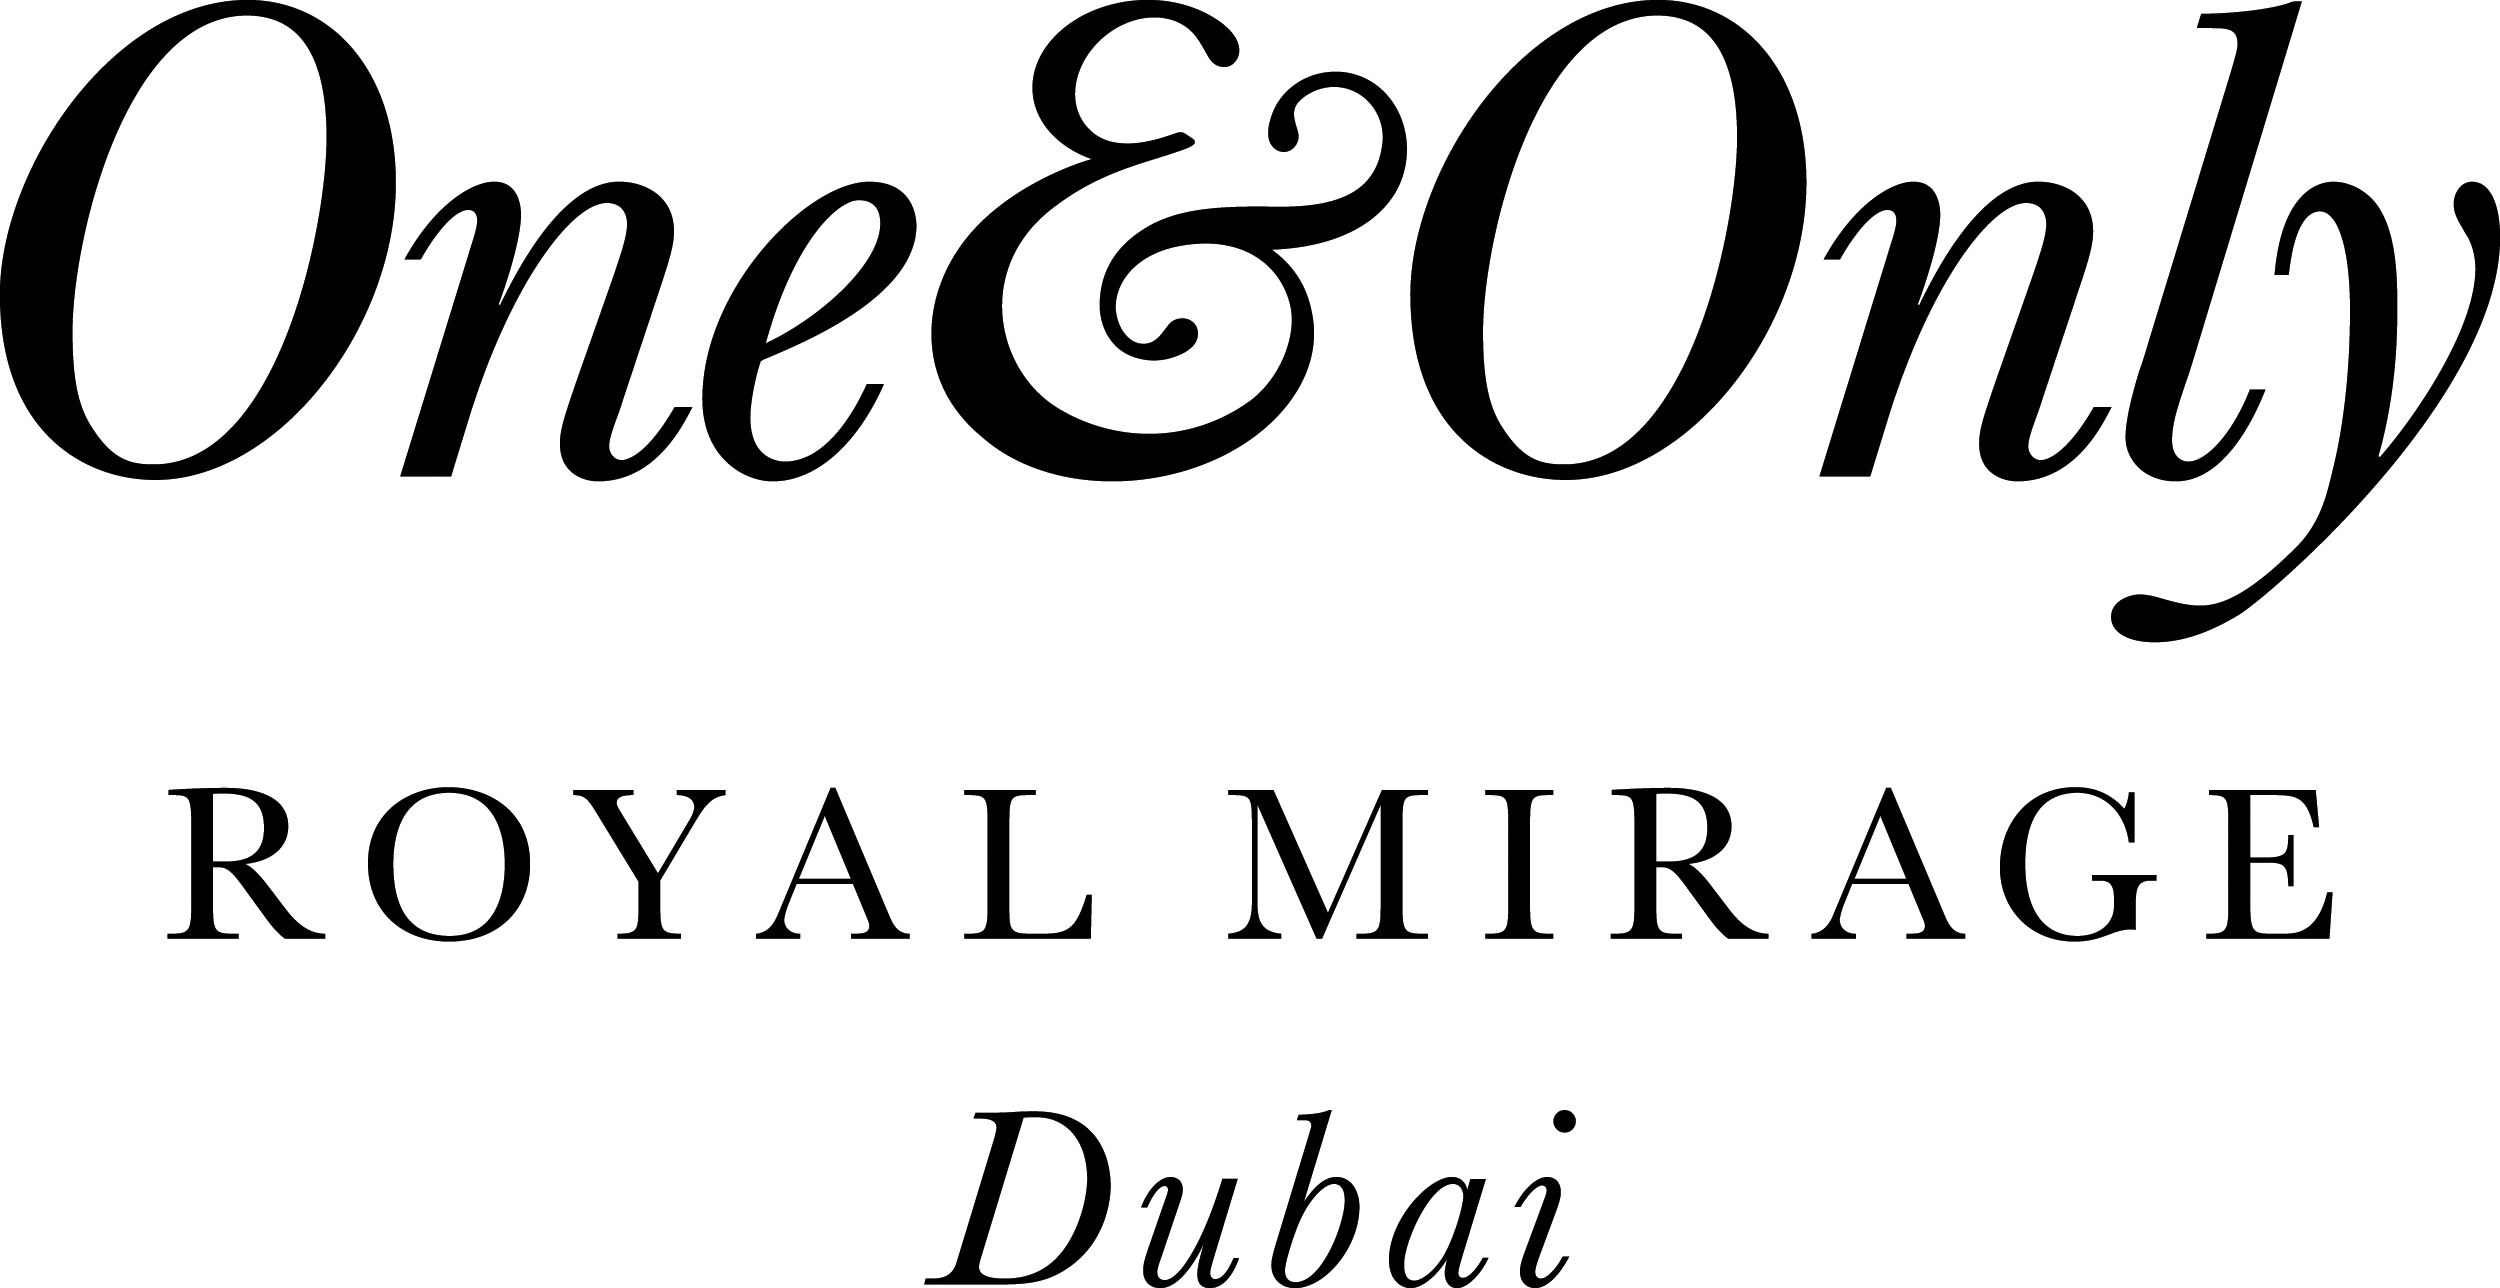 One&Only Royal Mirage logo